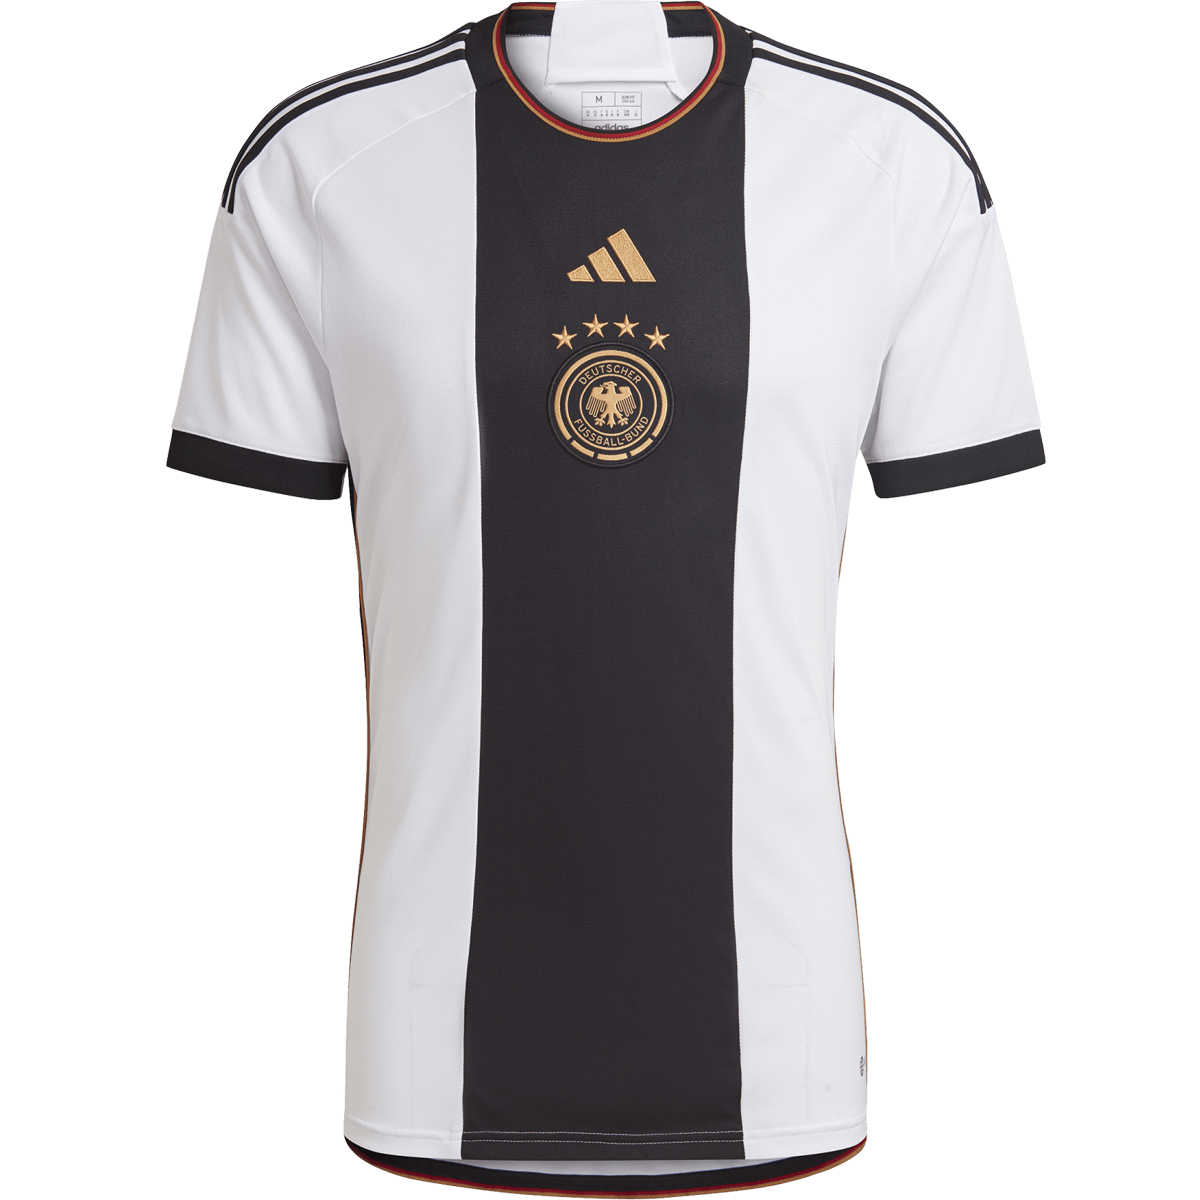 Men's Germany 22 Home Jersey alternate view